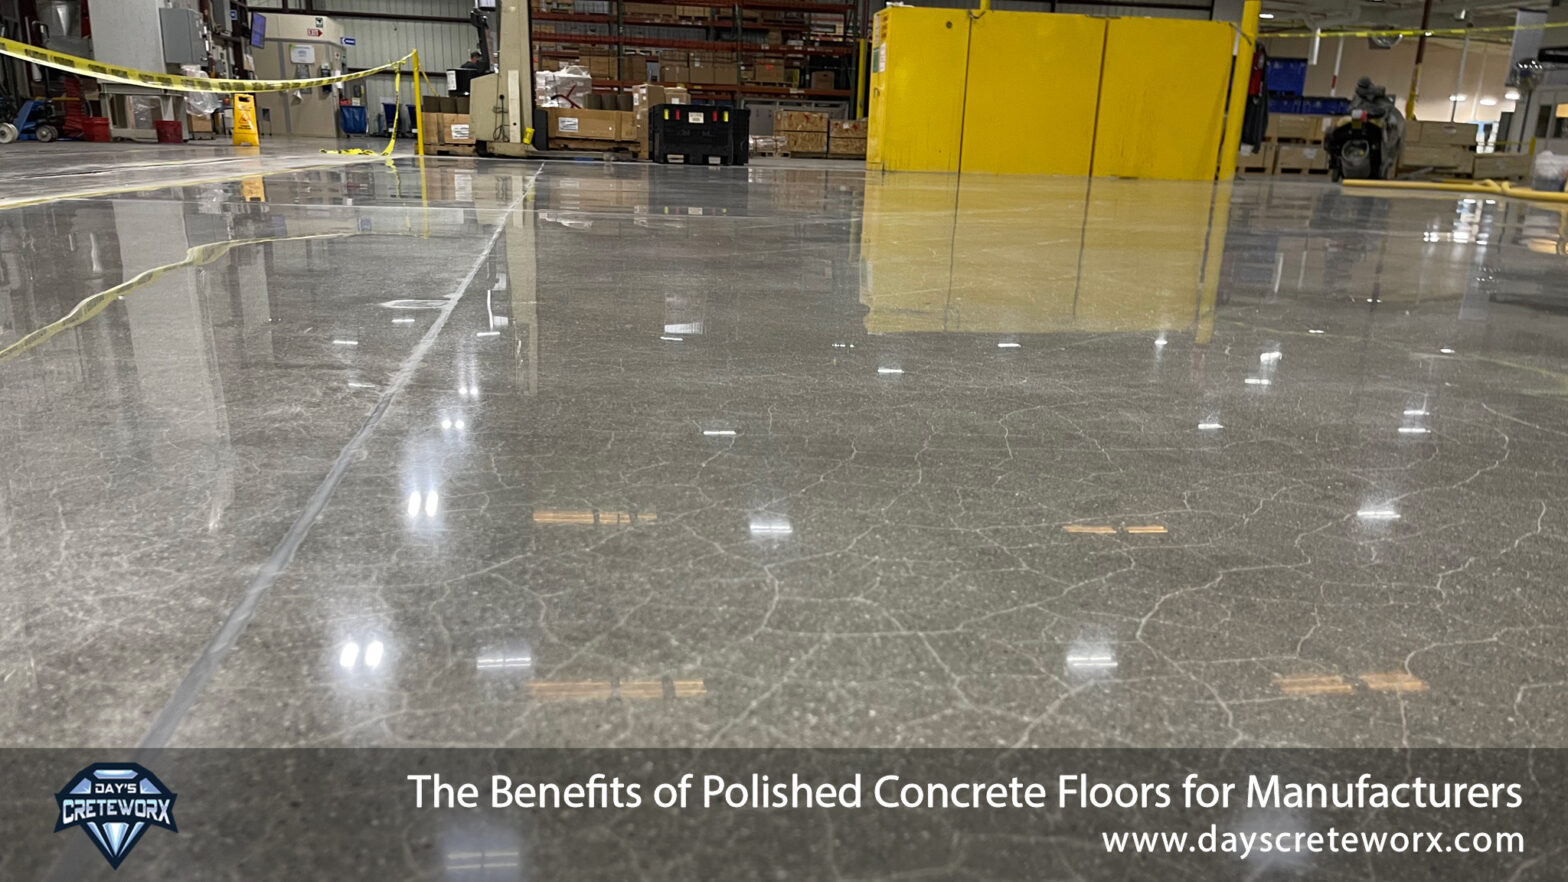 Polished Concrete Floors for Manufacturers